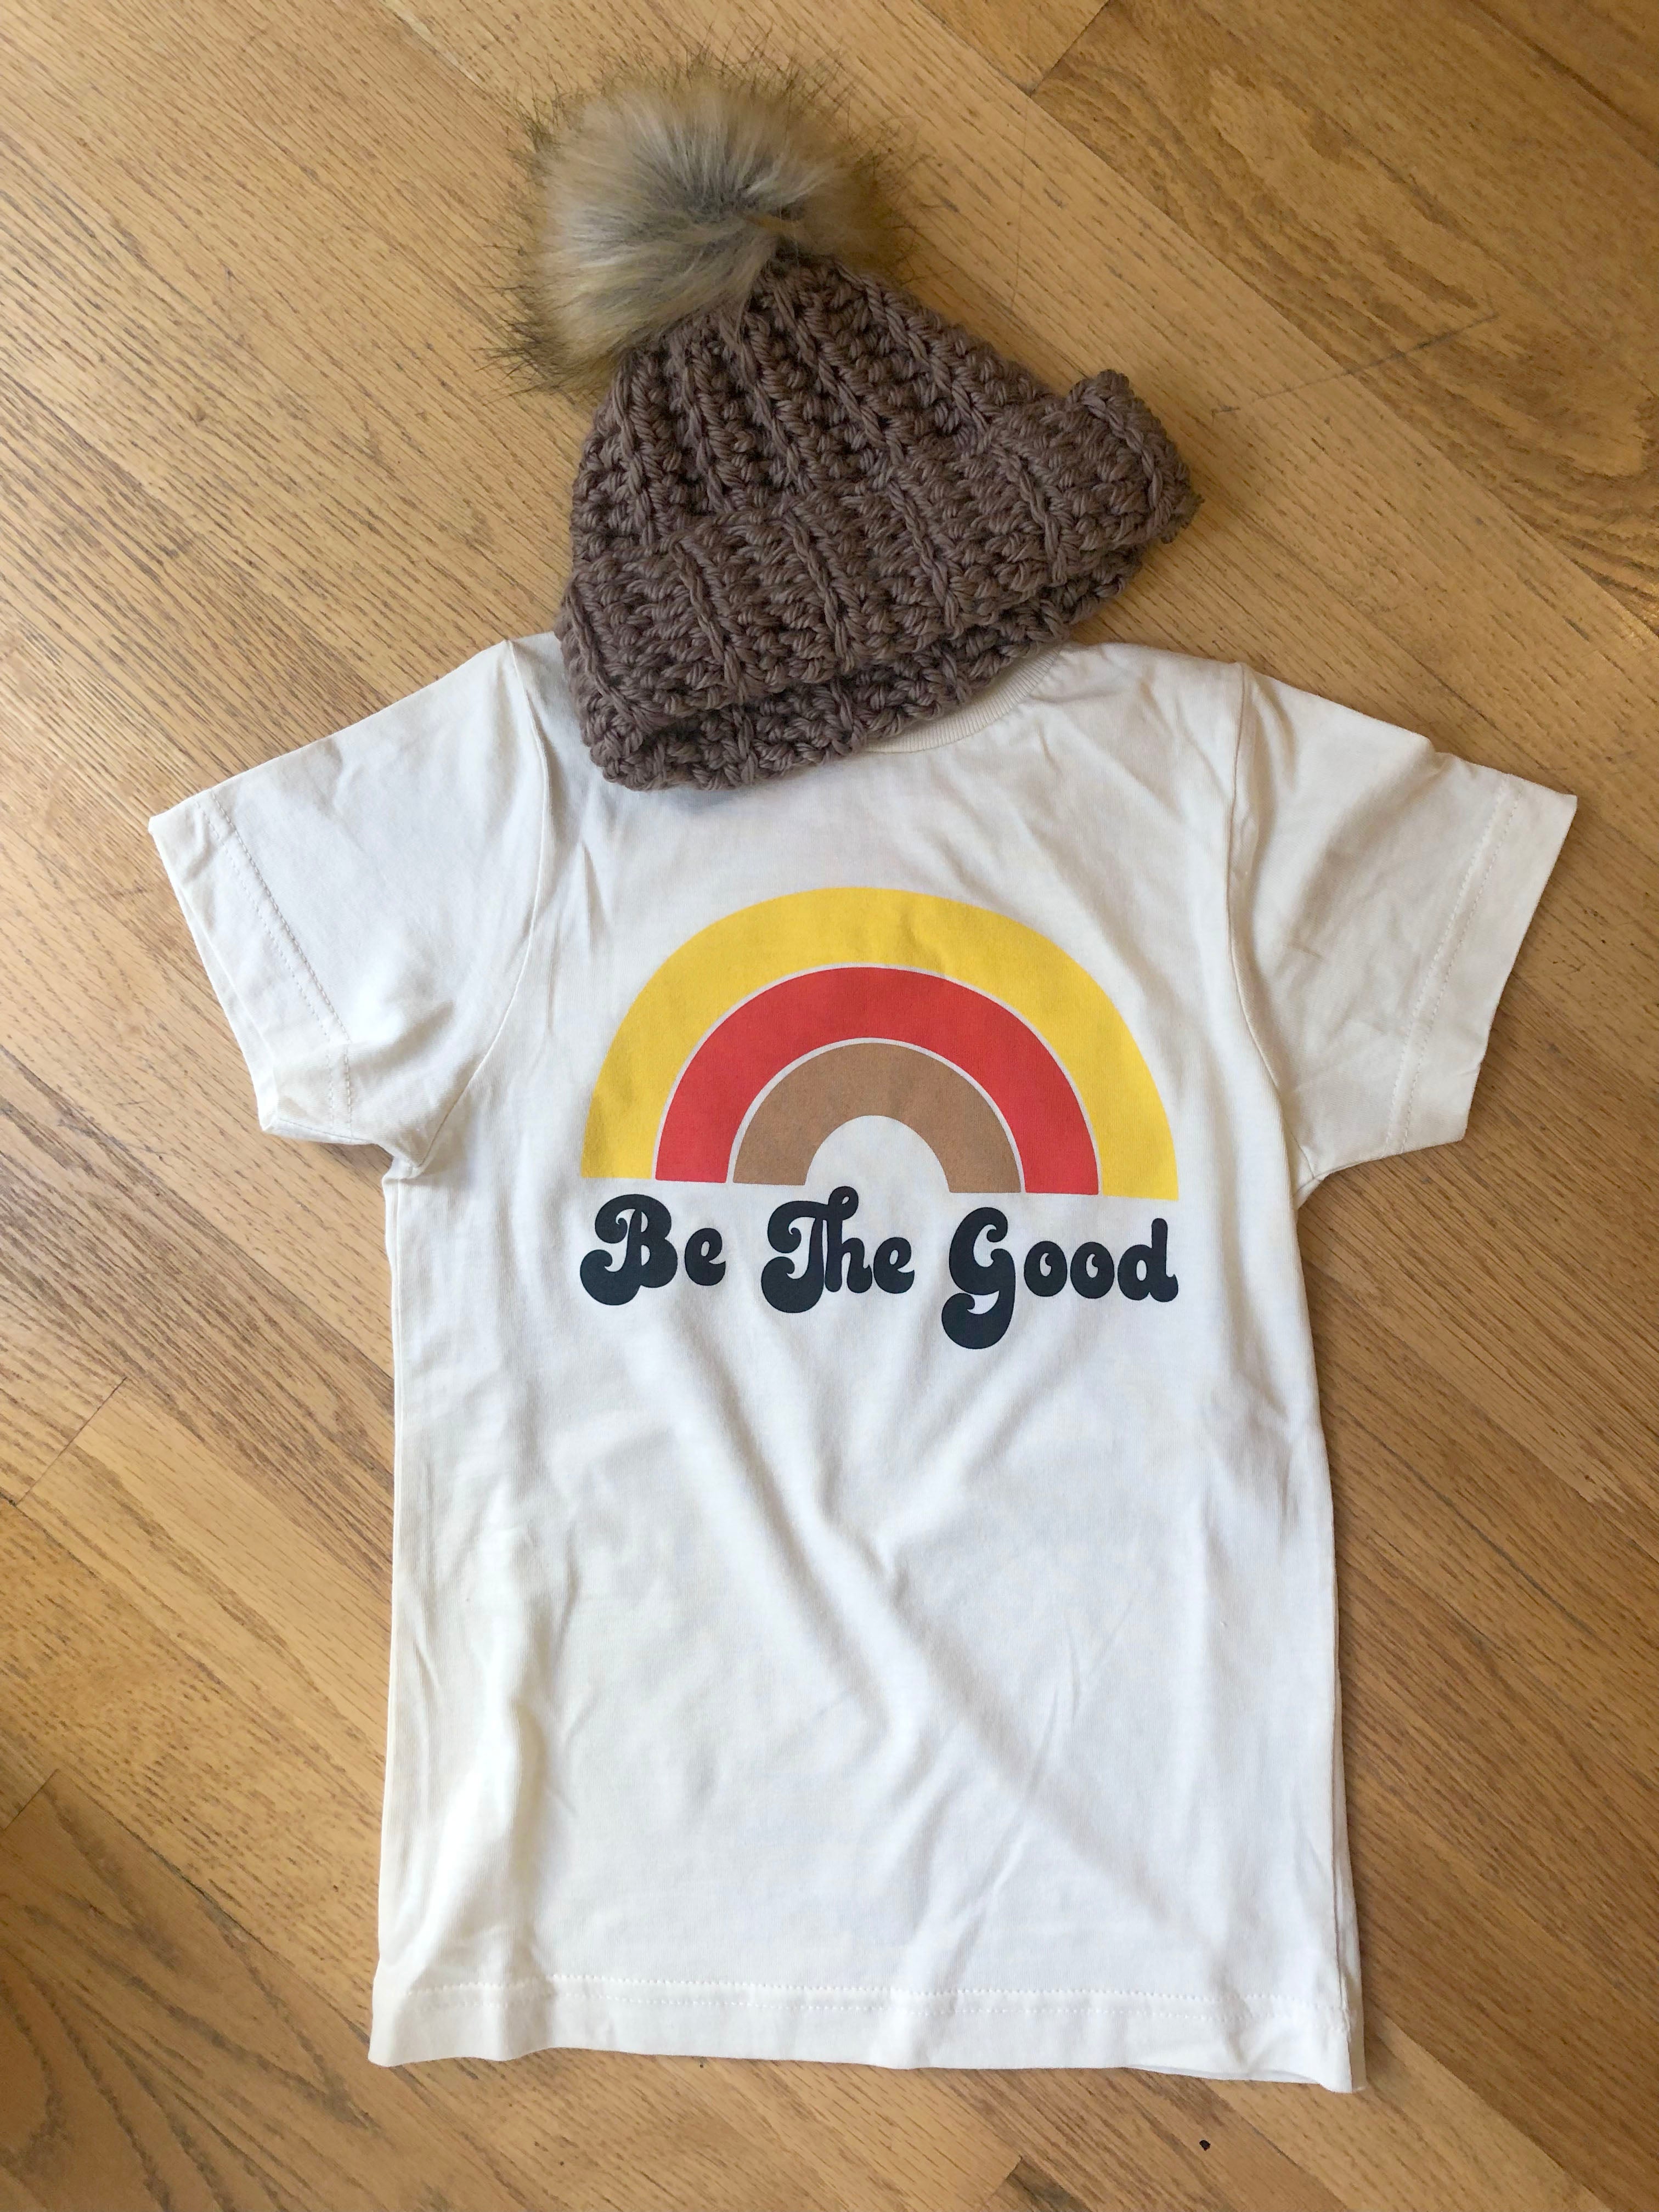 Be The Good Kid's T-Shirt